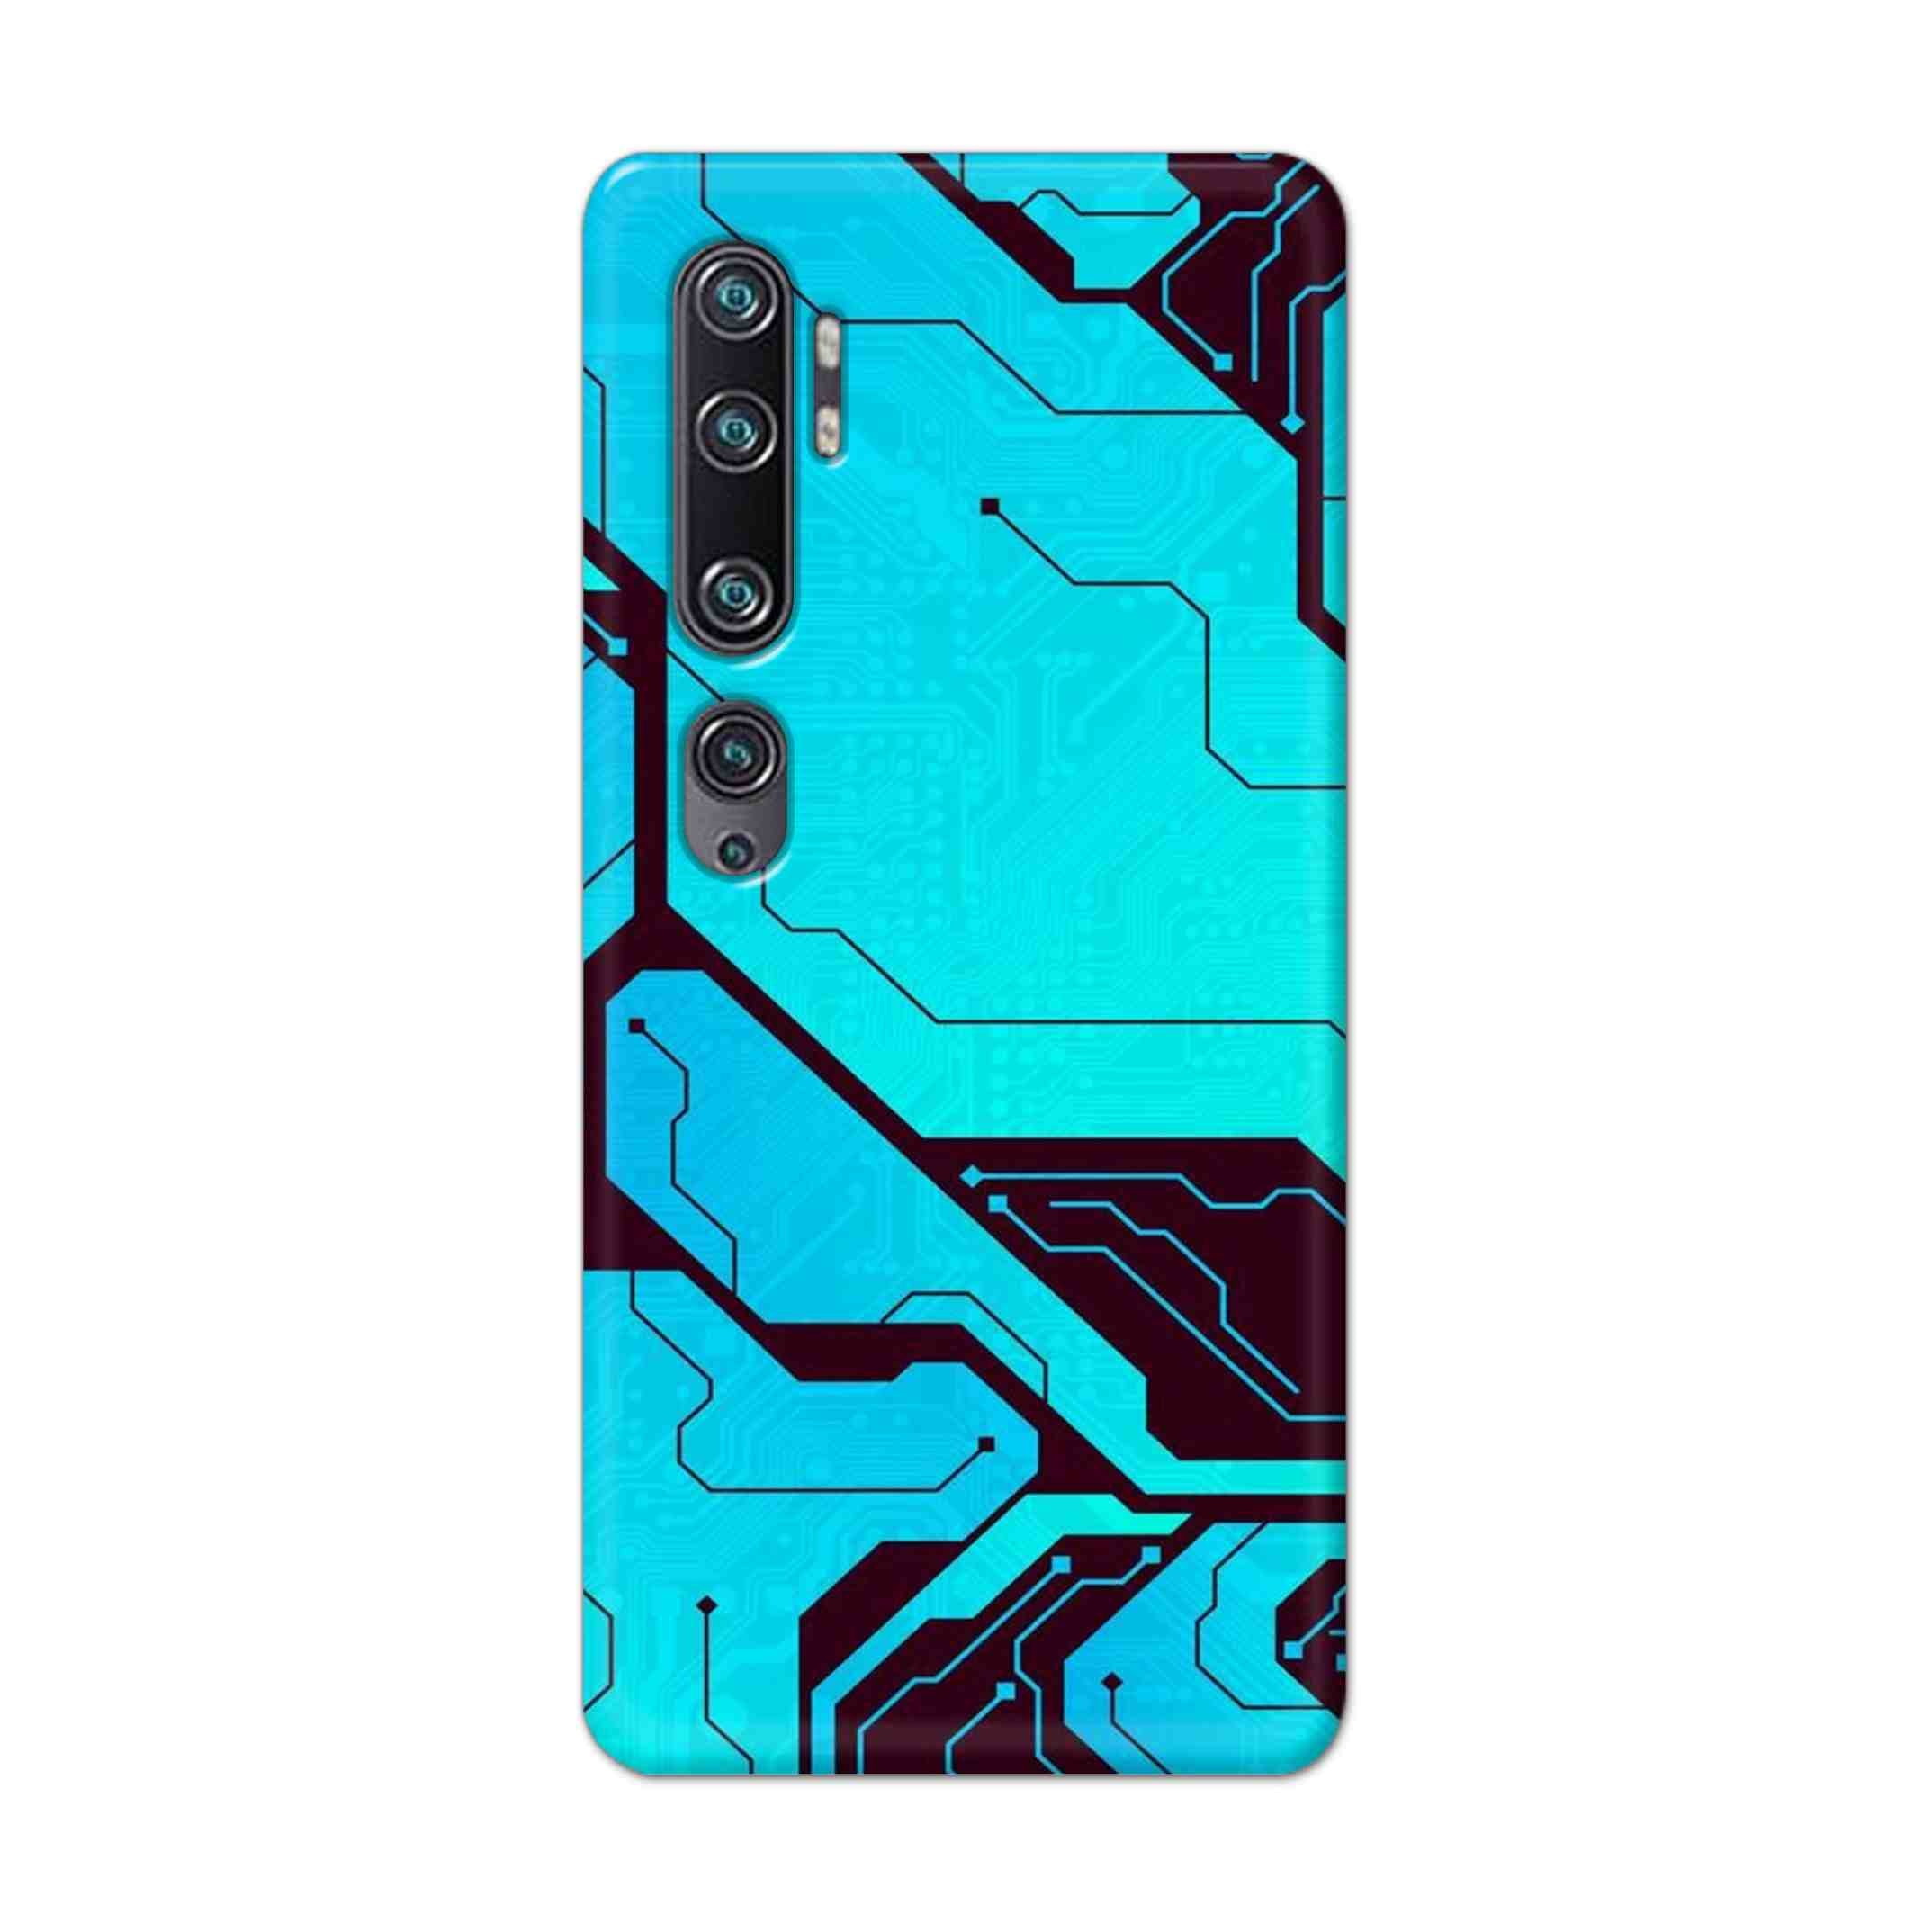 Buy Futuristic Line Hard Back Mobile Phone Case Cover For Xiaomi Mi Note 10 Online